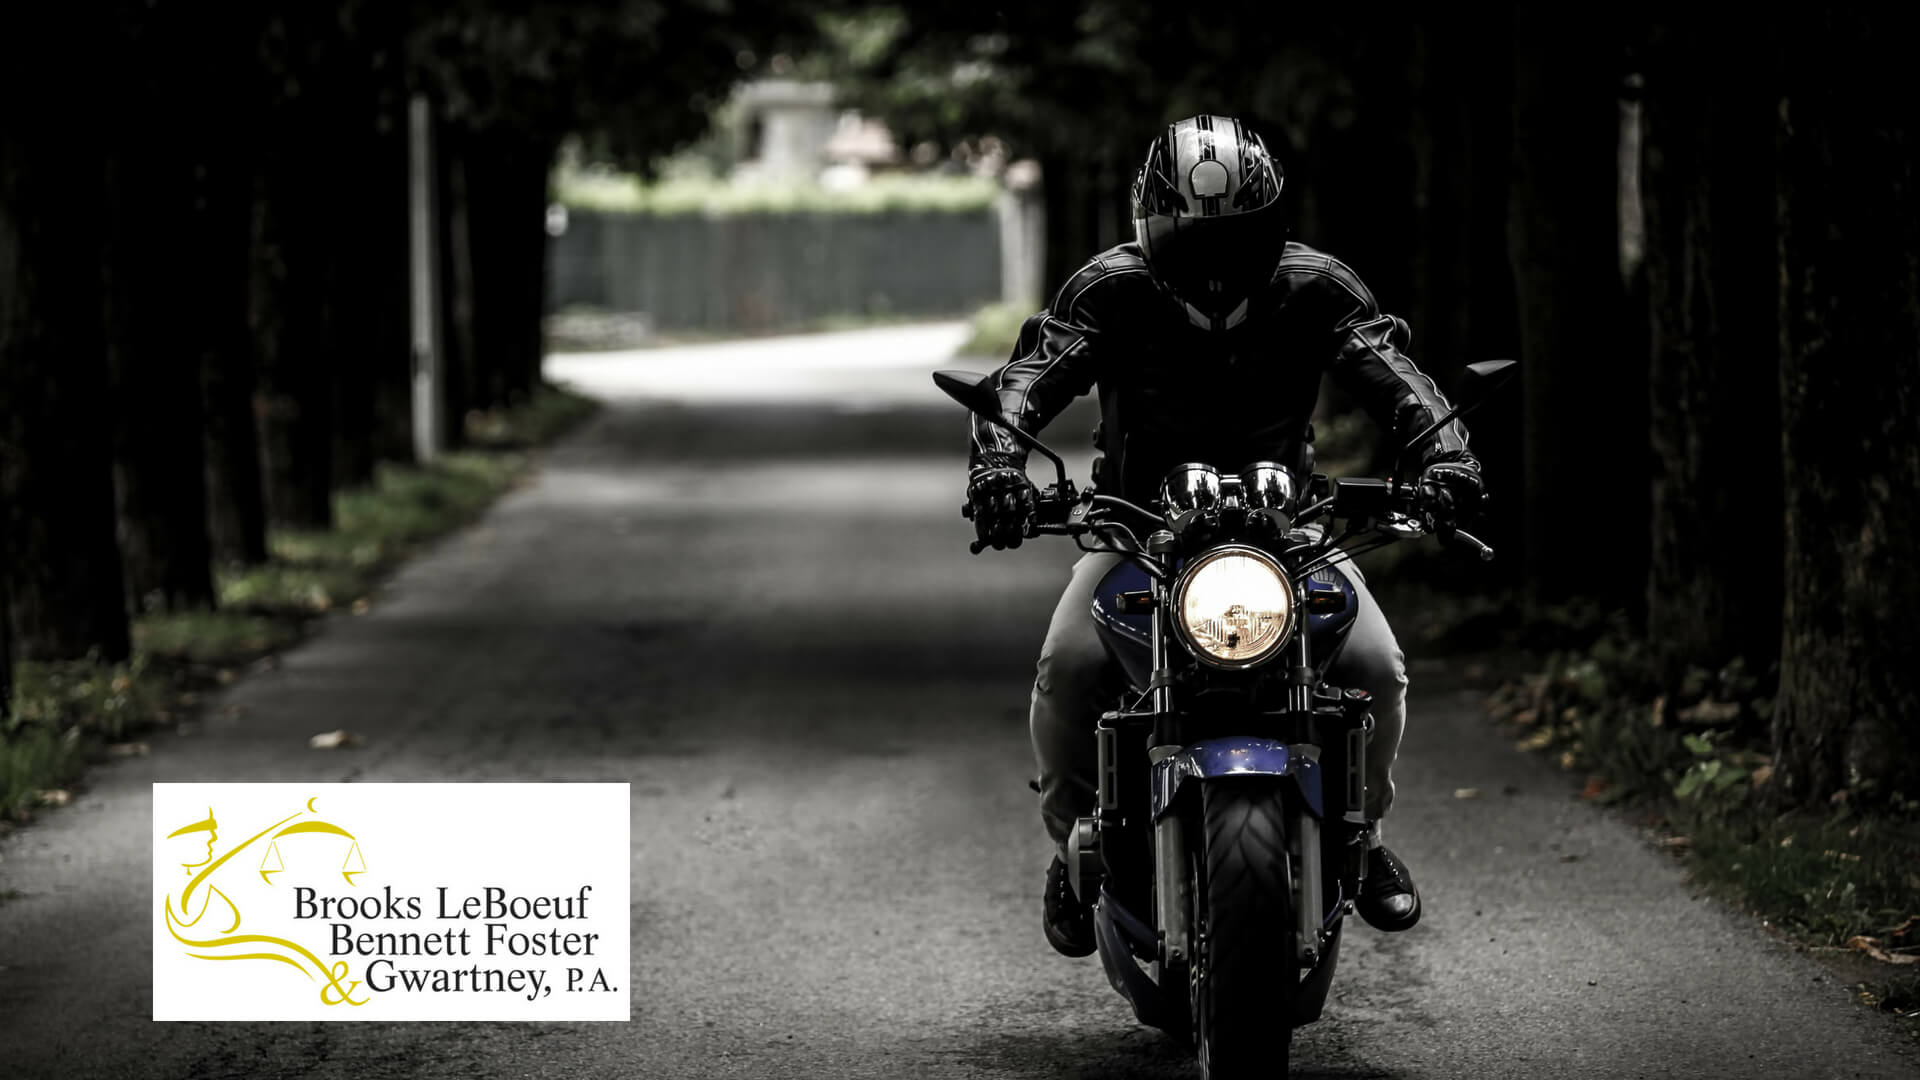 5 Tips to Stay Safe When Riding a Motorcycle